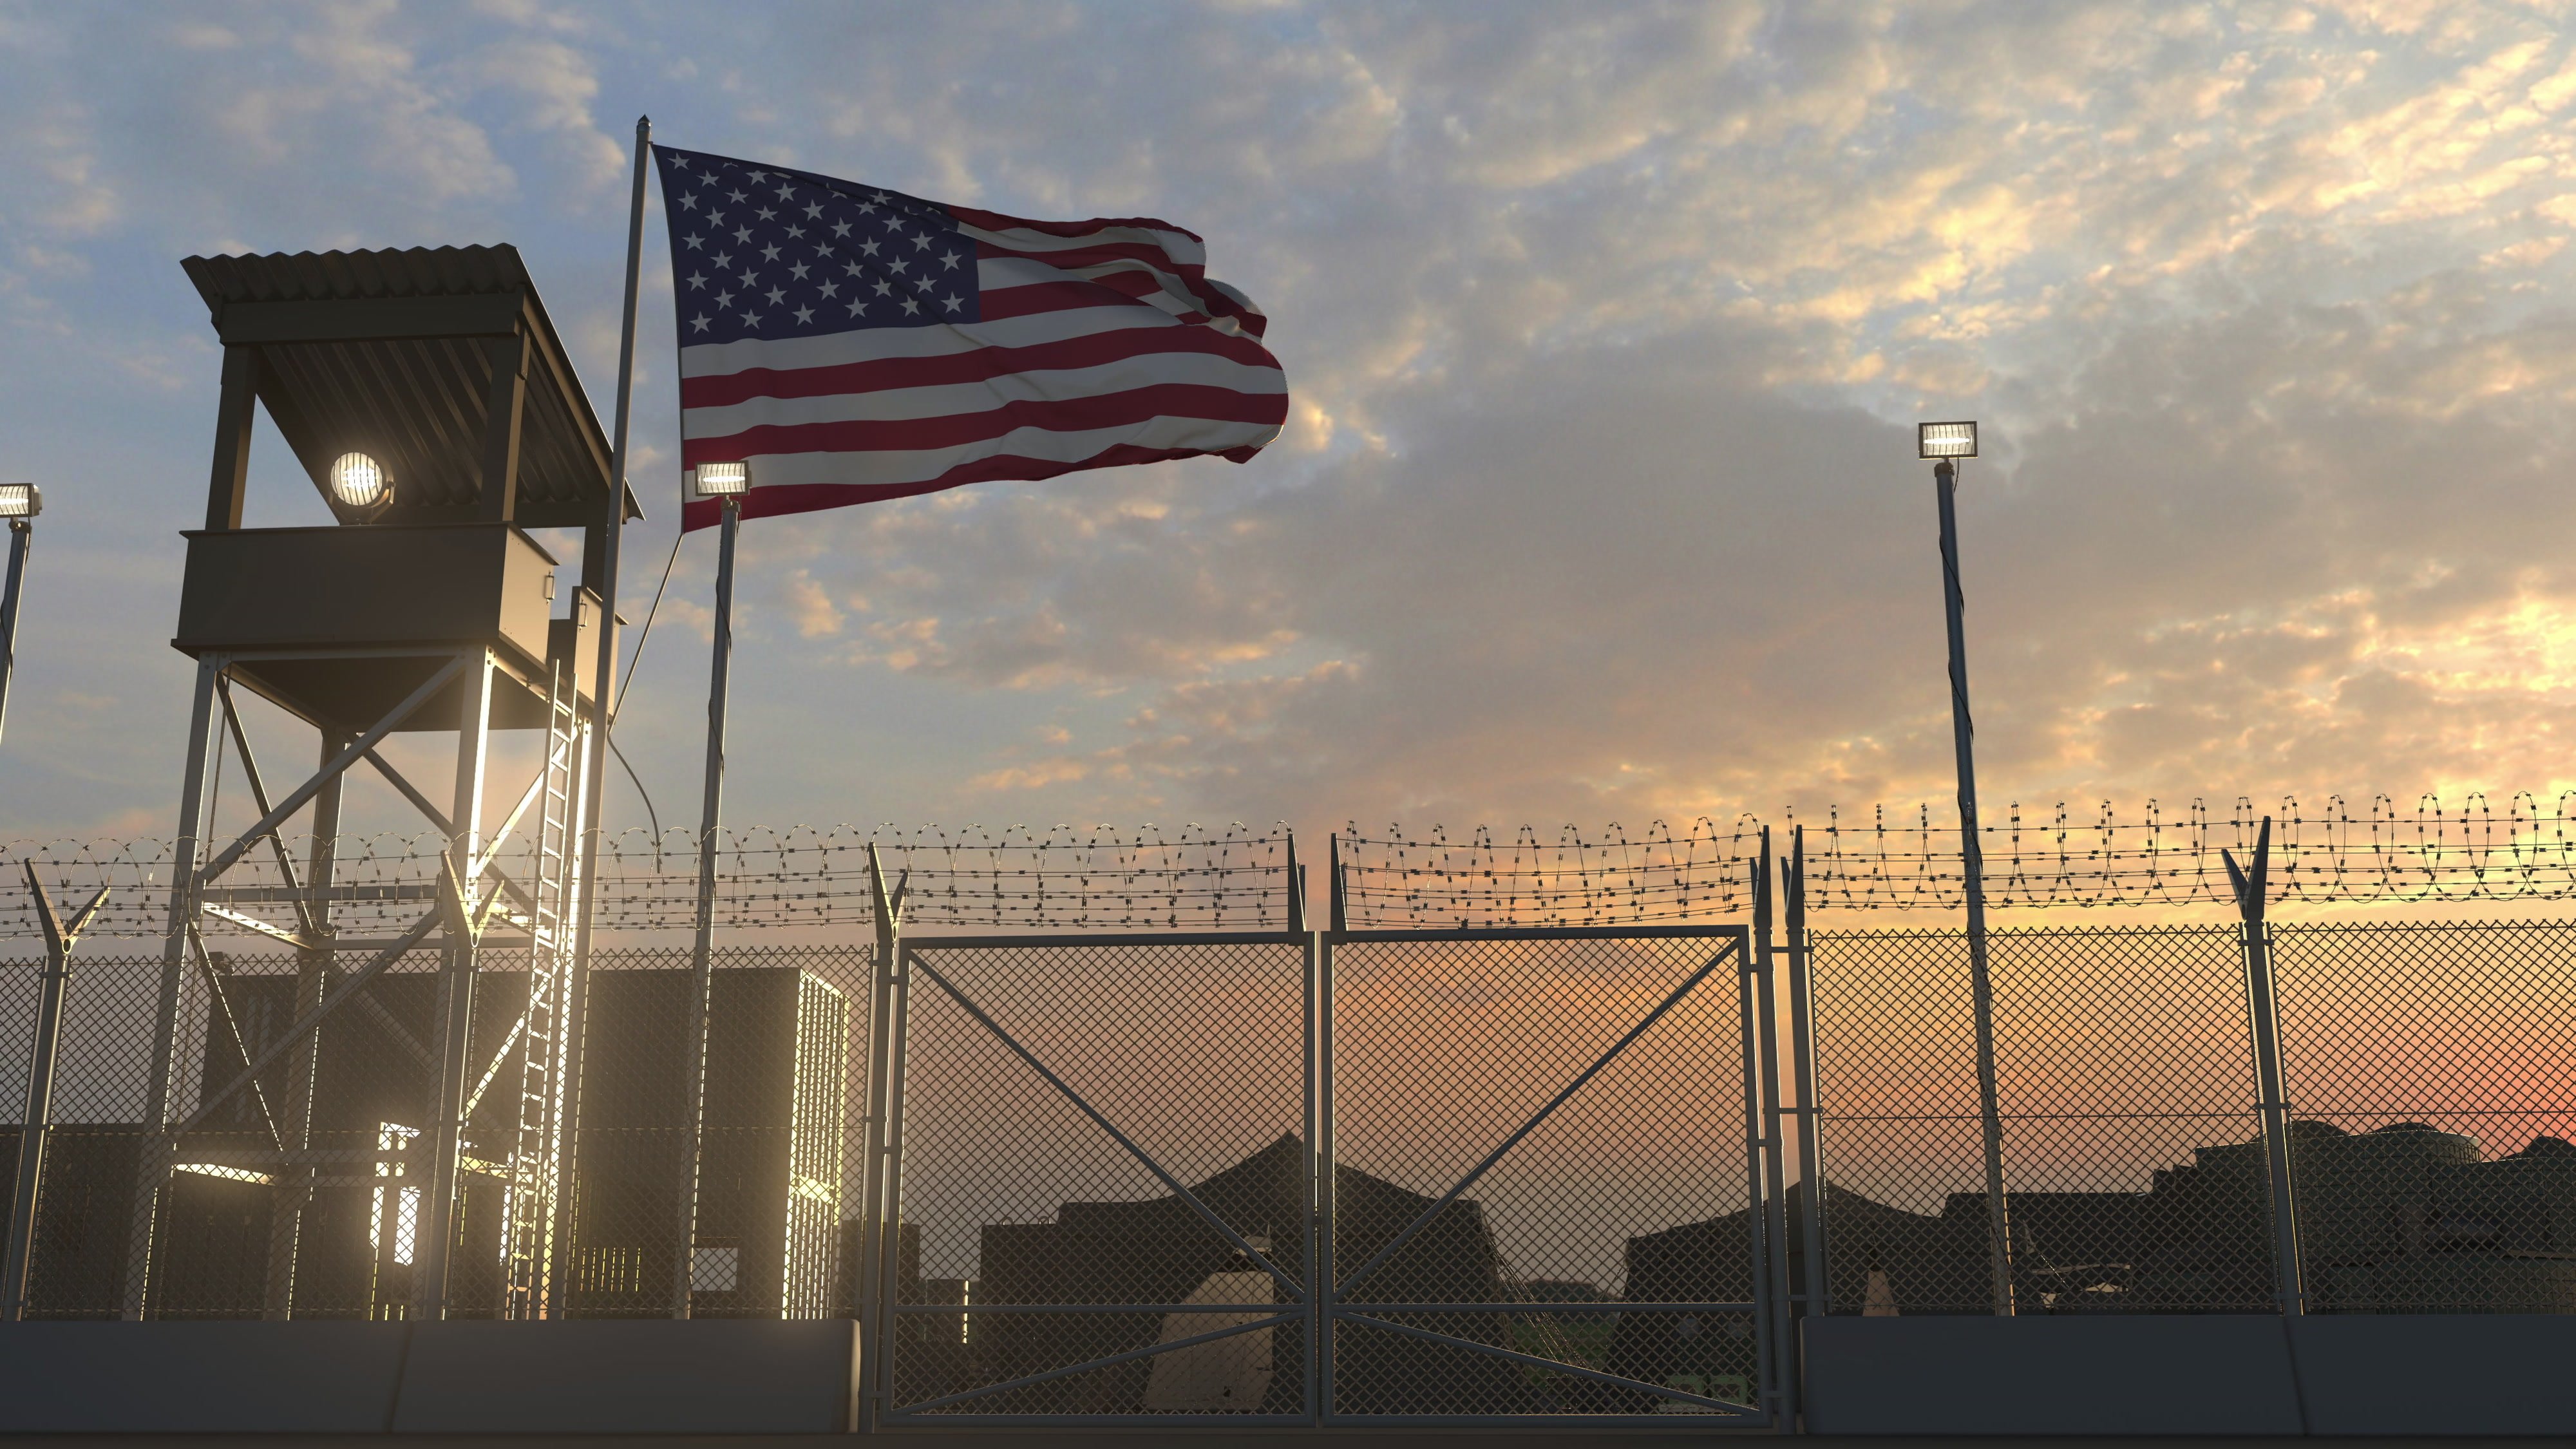 Military base with waving flag 3d rendering | Photo: Shutterstock